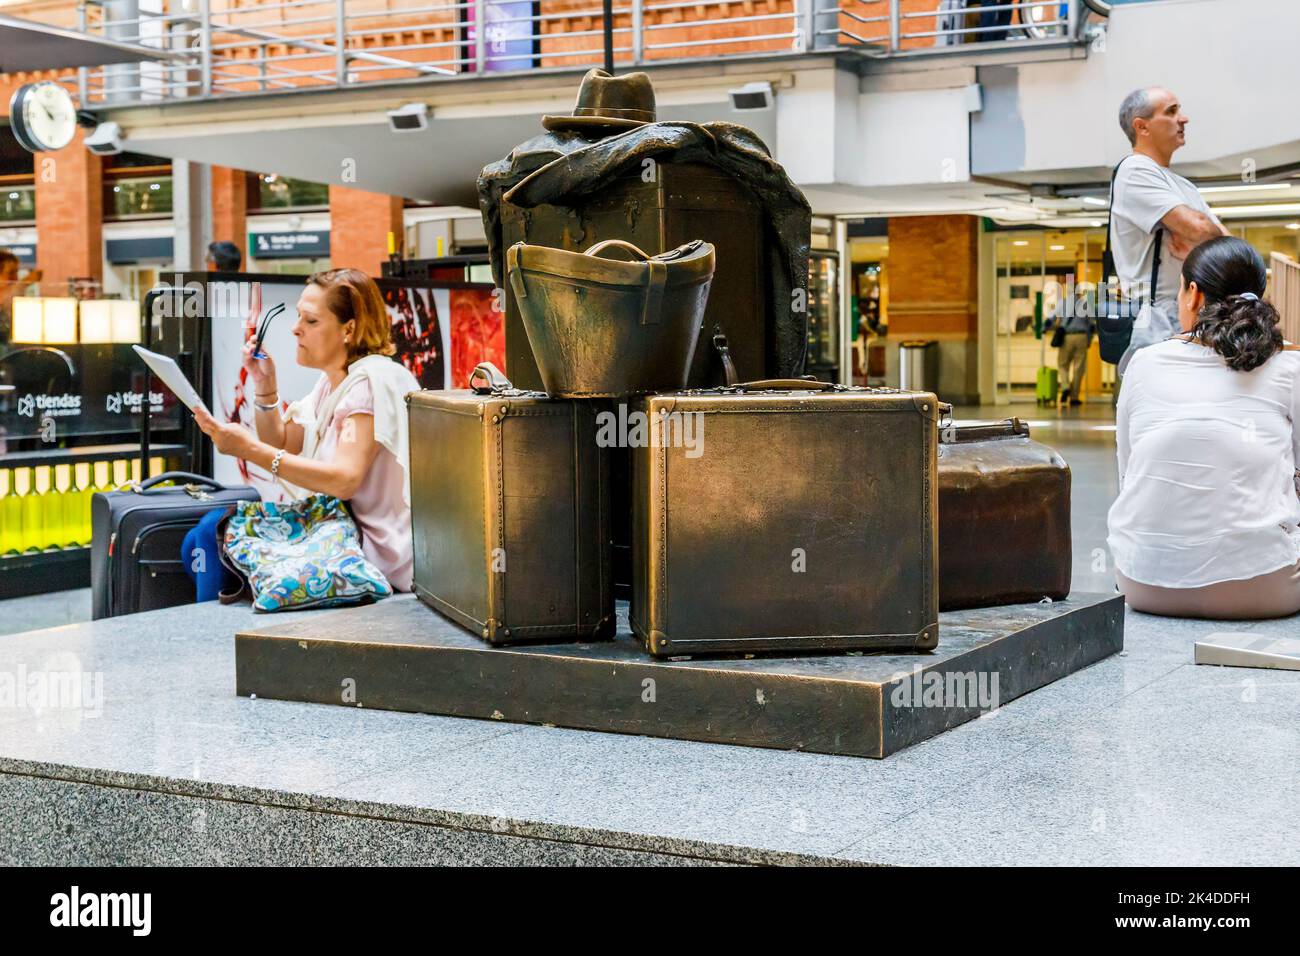 MADRID, SPAIN - MAY 24, 2017:It is a monument to forgotten luggage in the waiting hall of railway station Atocha. Stock Photo